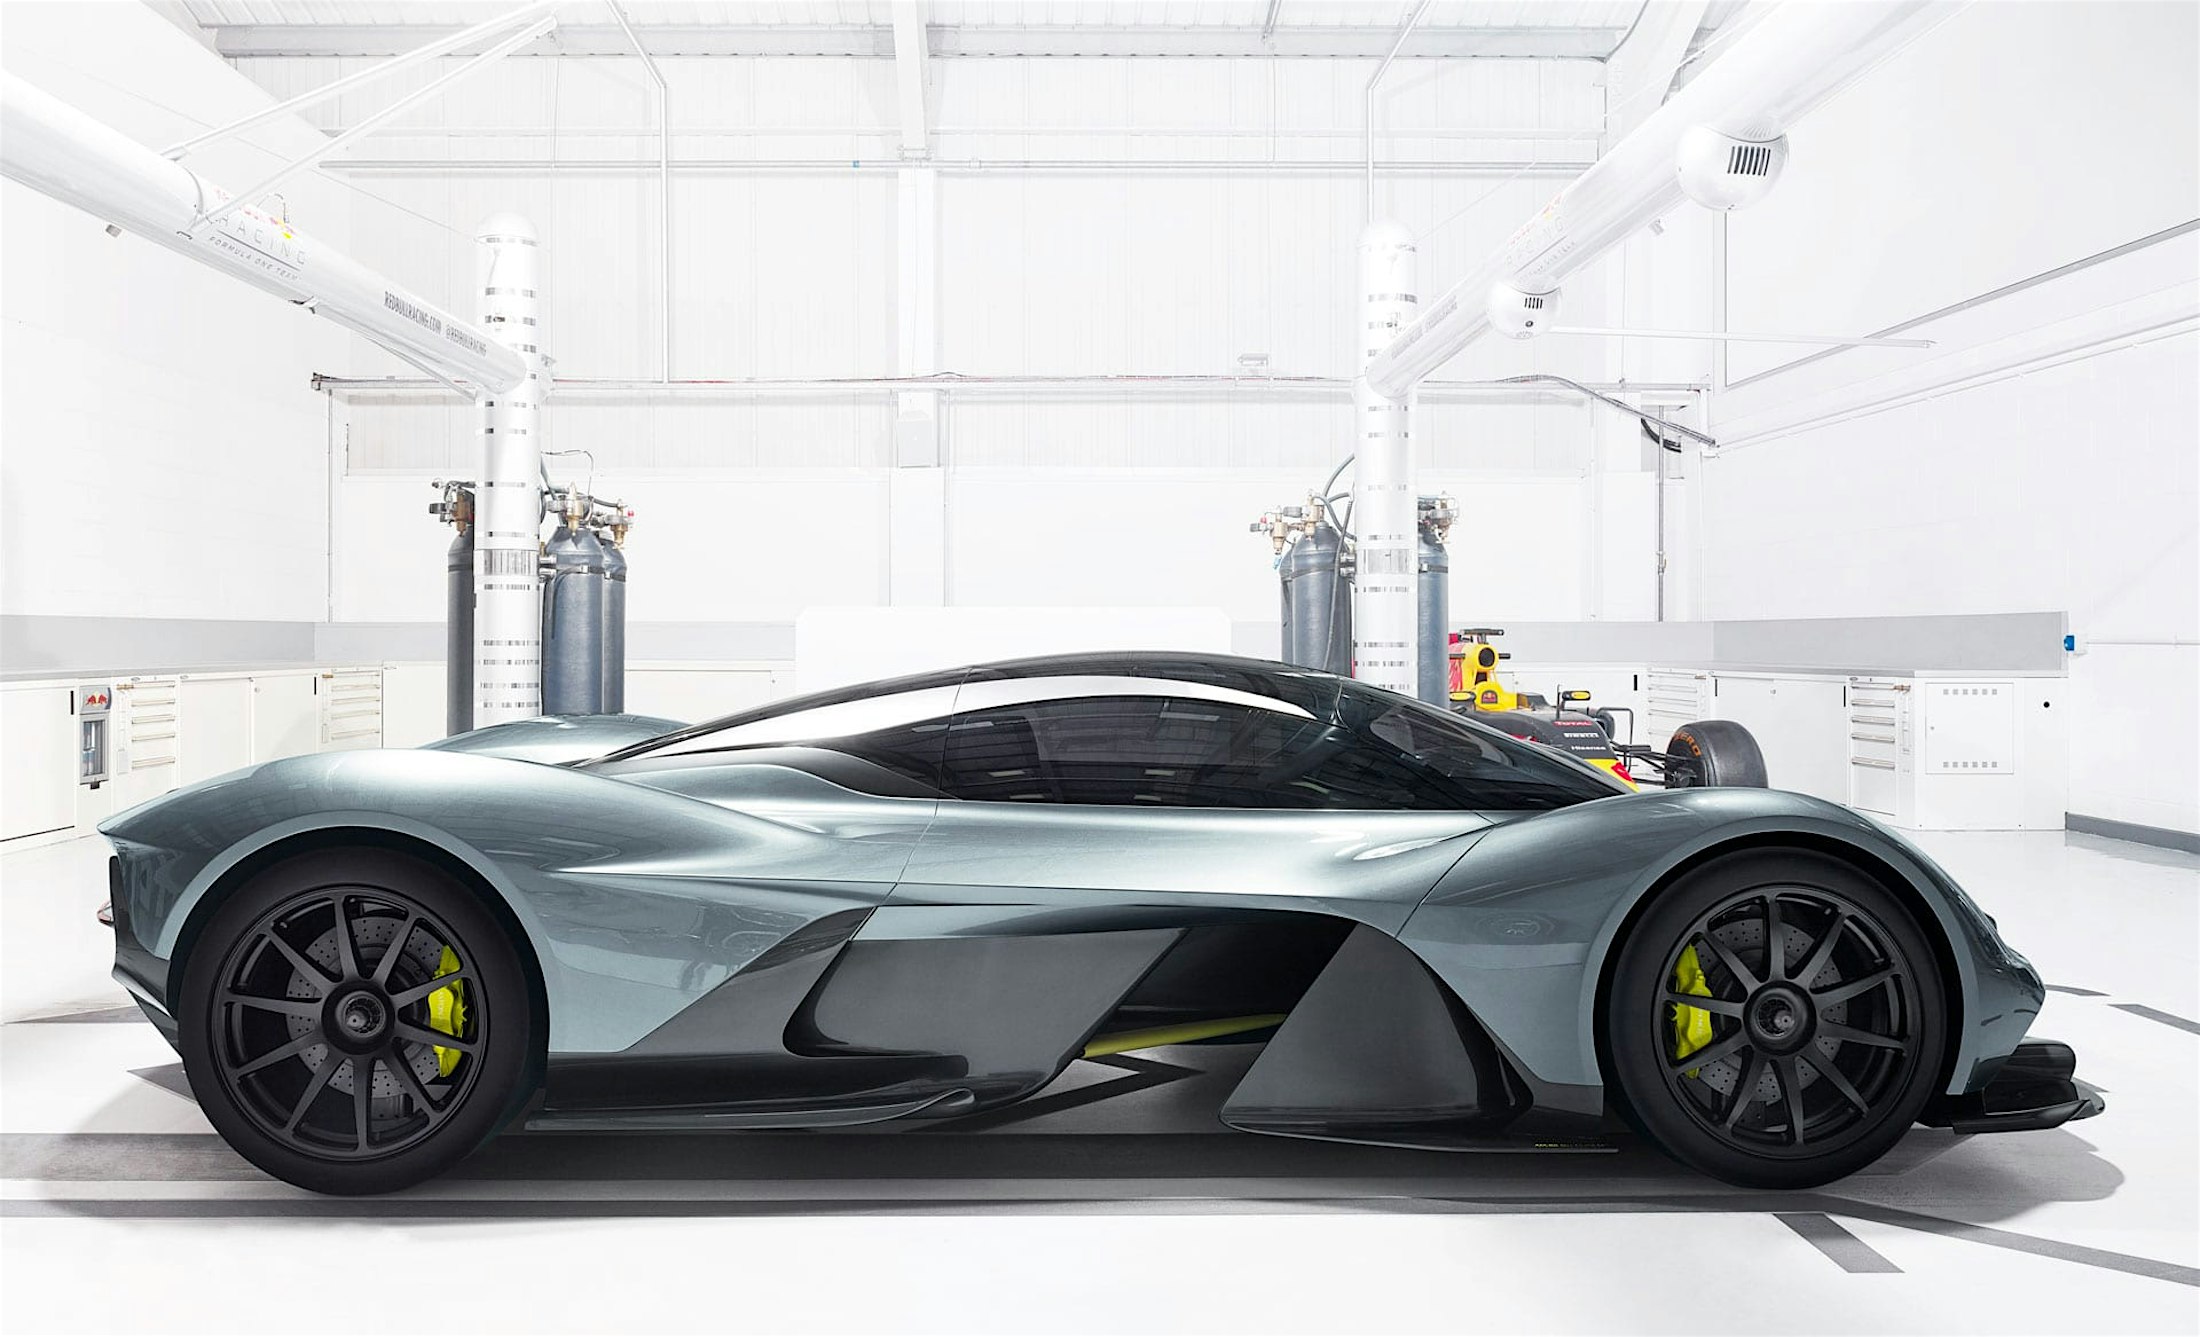 Rimac is developing the Battery System for the AM-RB 001